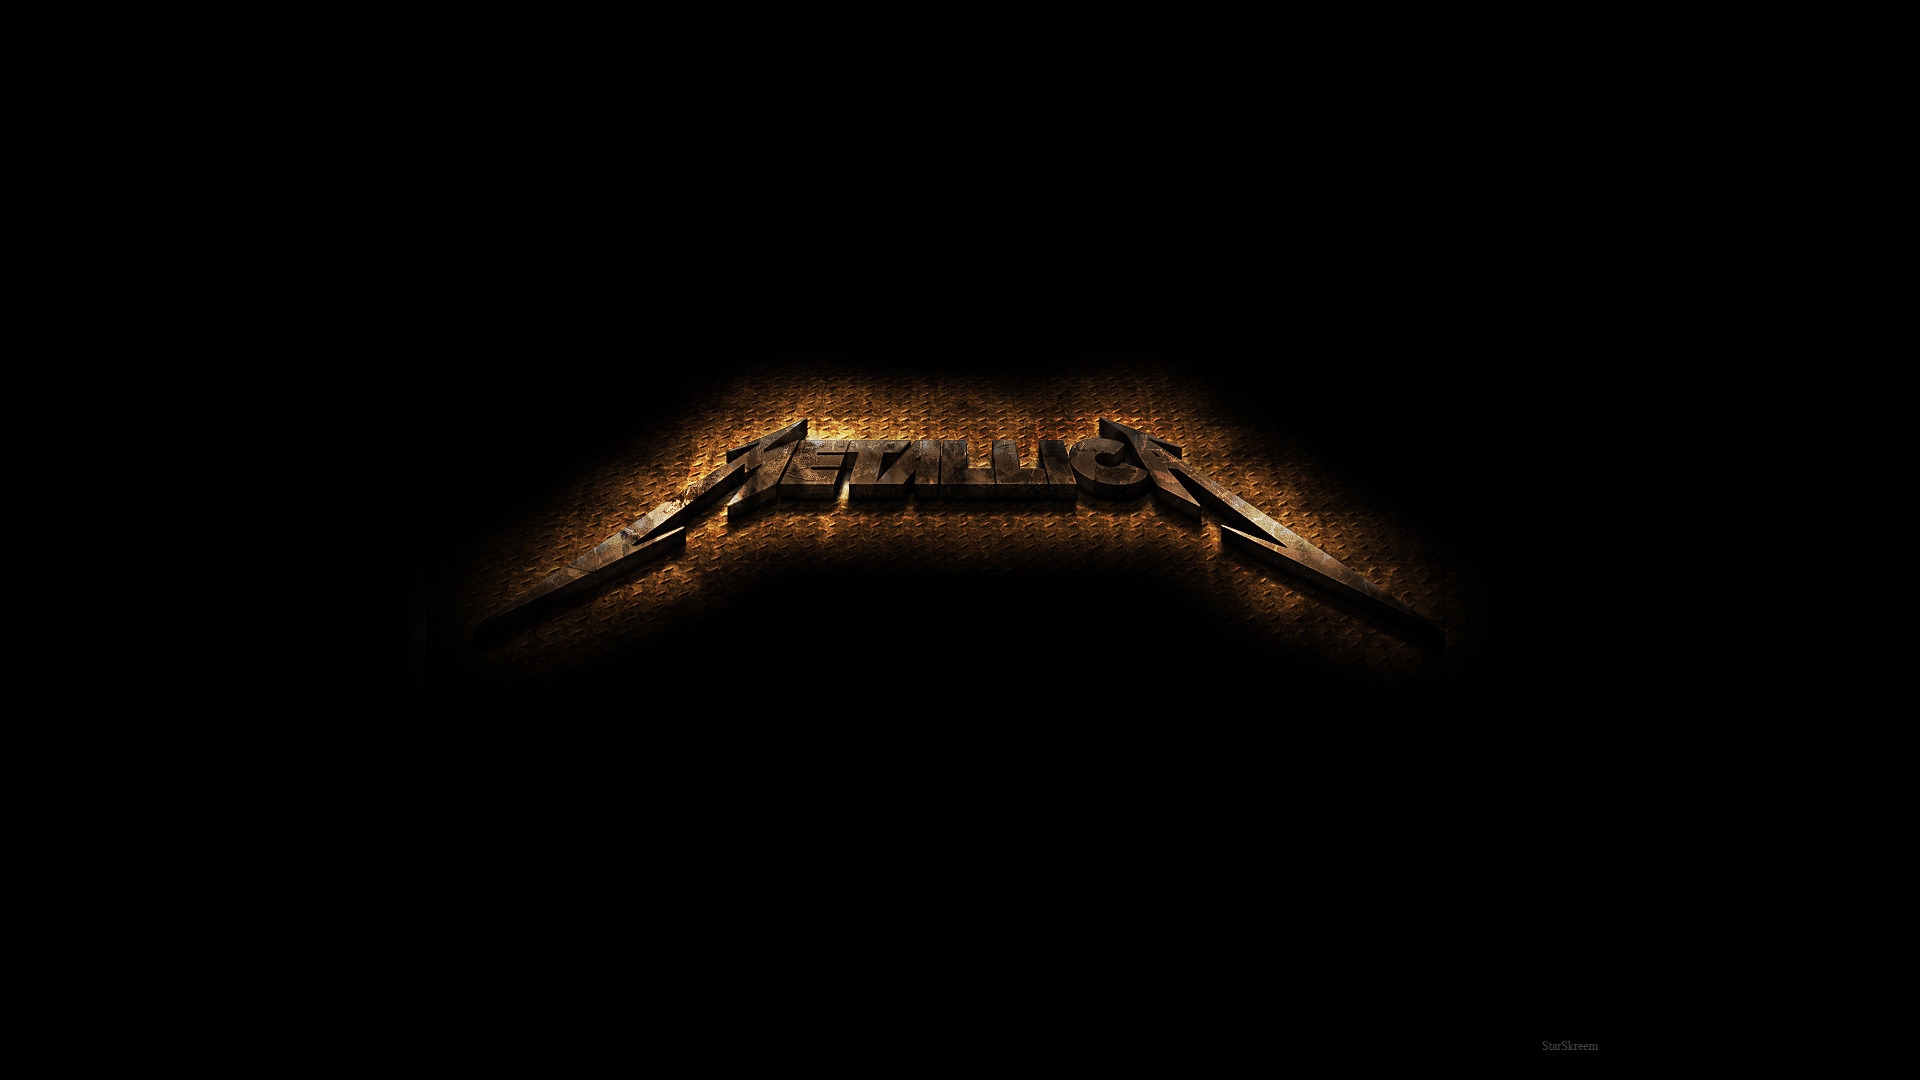 Metallica Rusted for 1920 x 1080 HDTV 1080p resolution